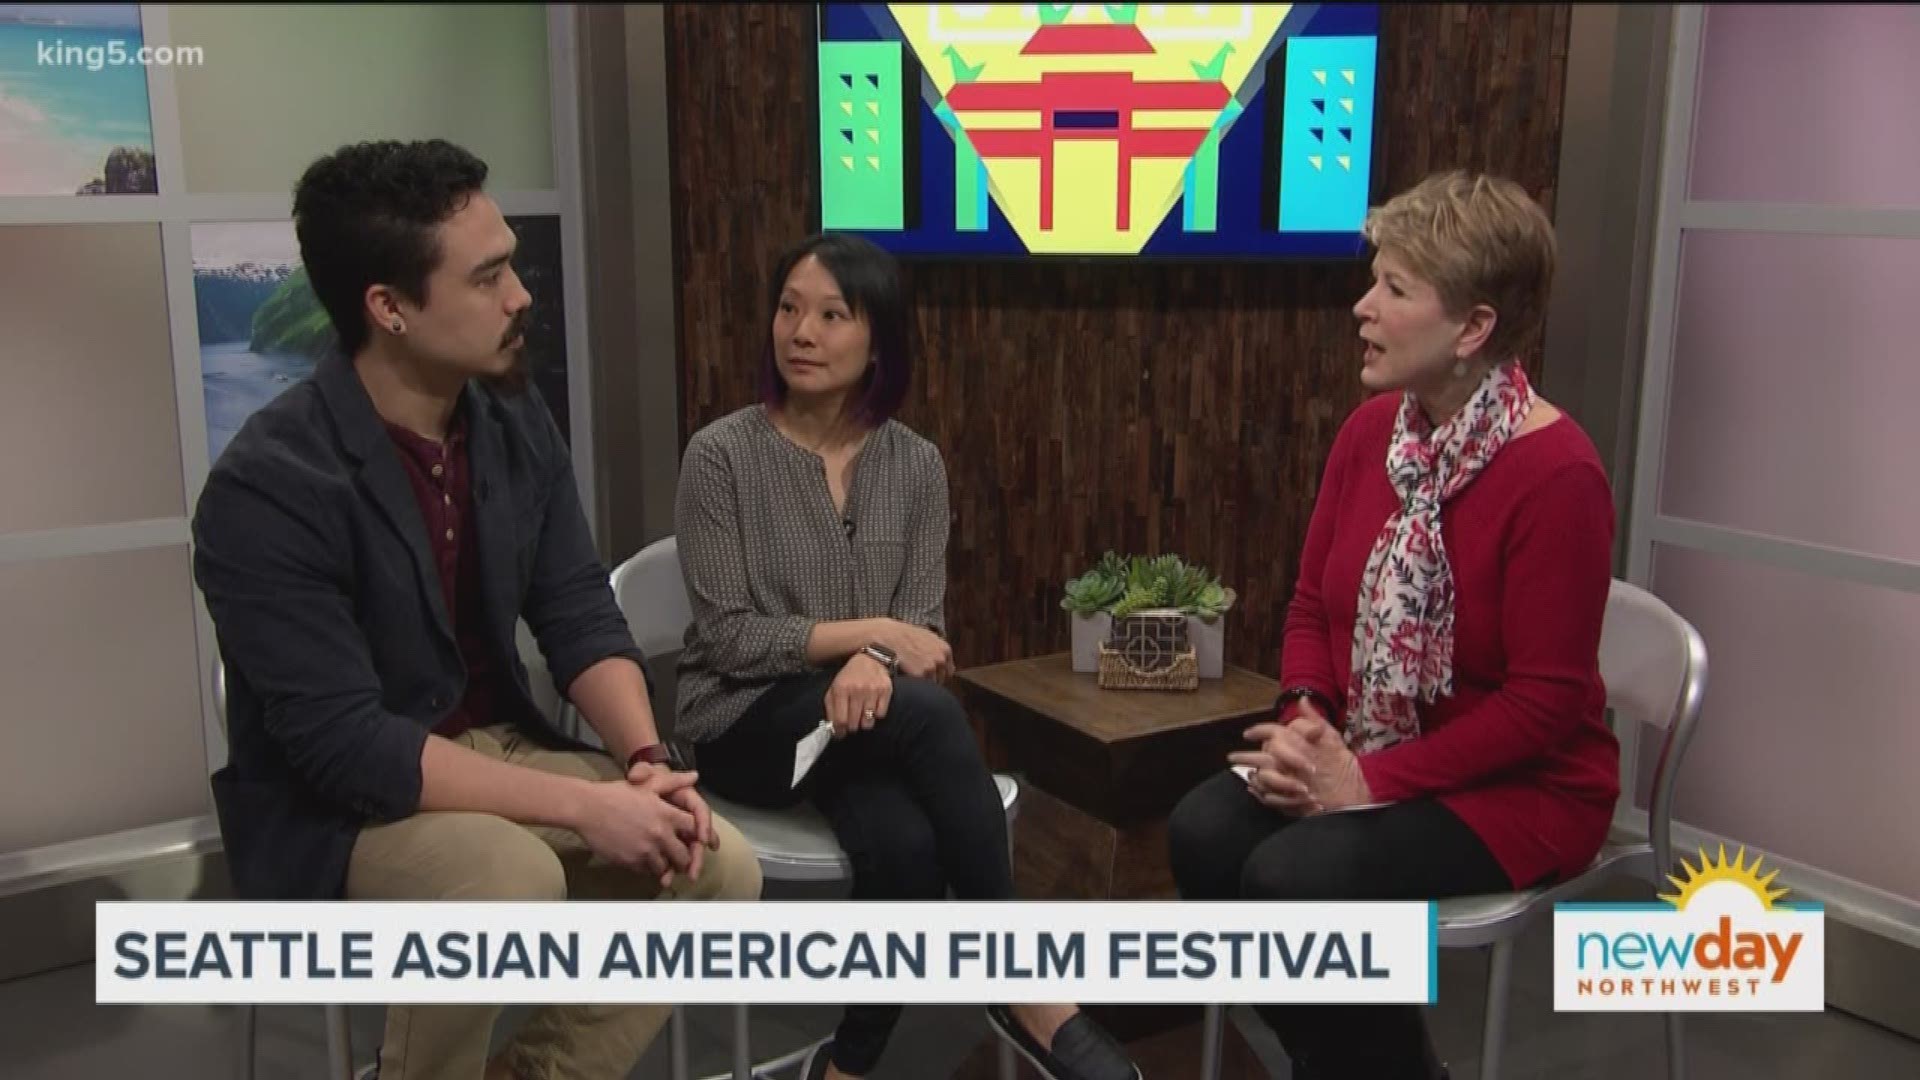 The festival highlights Asian filmmakers and actors.